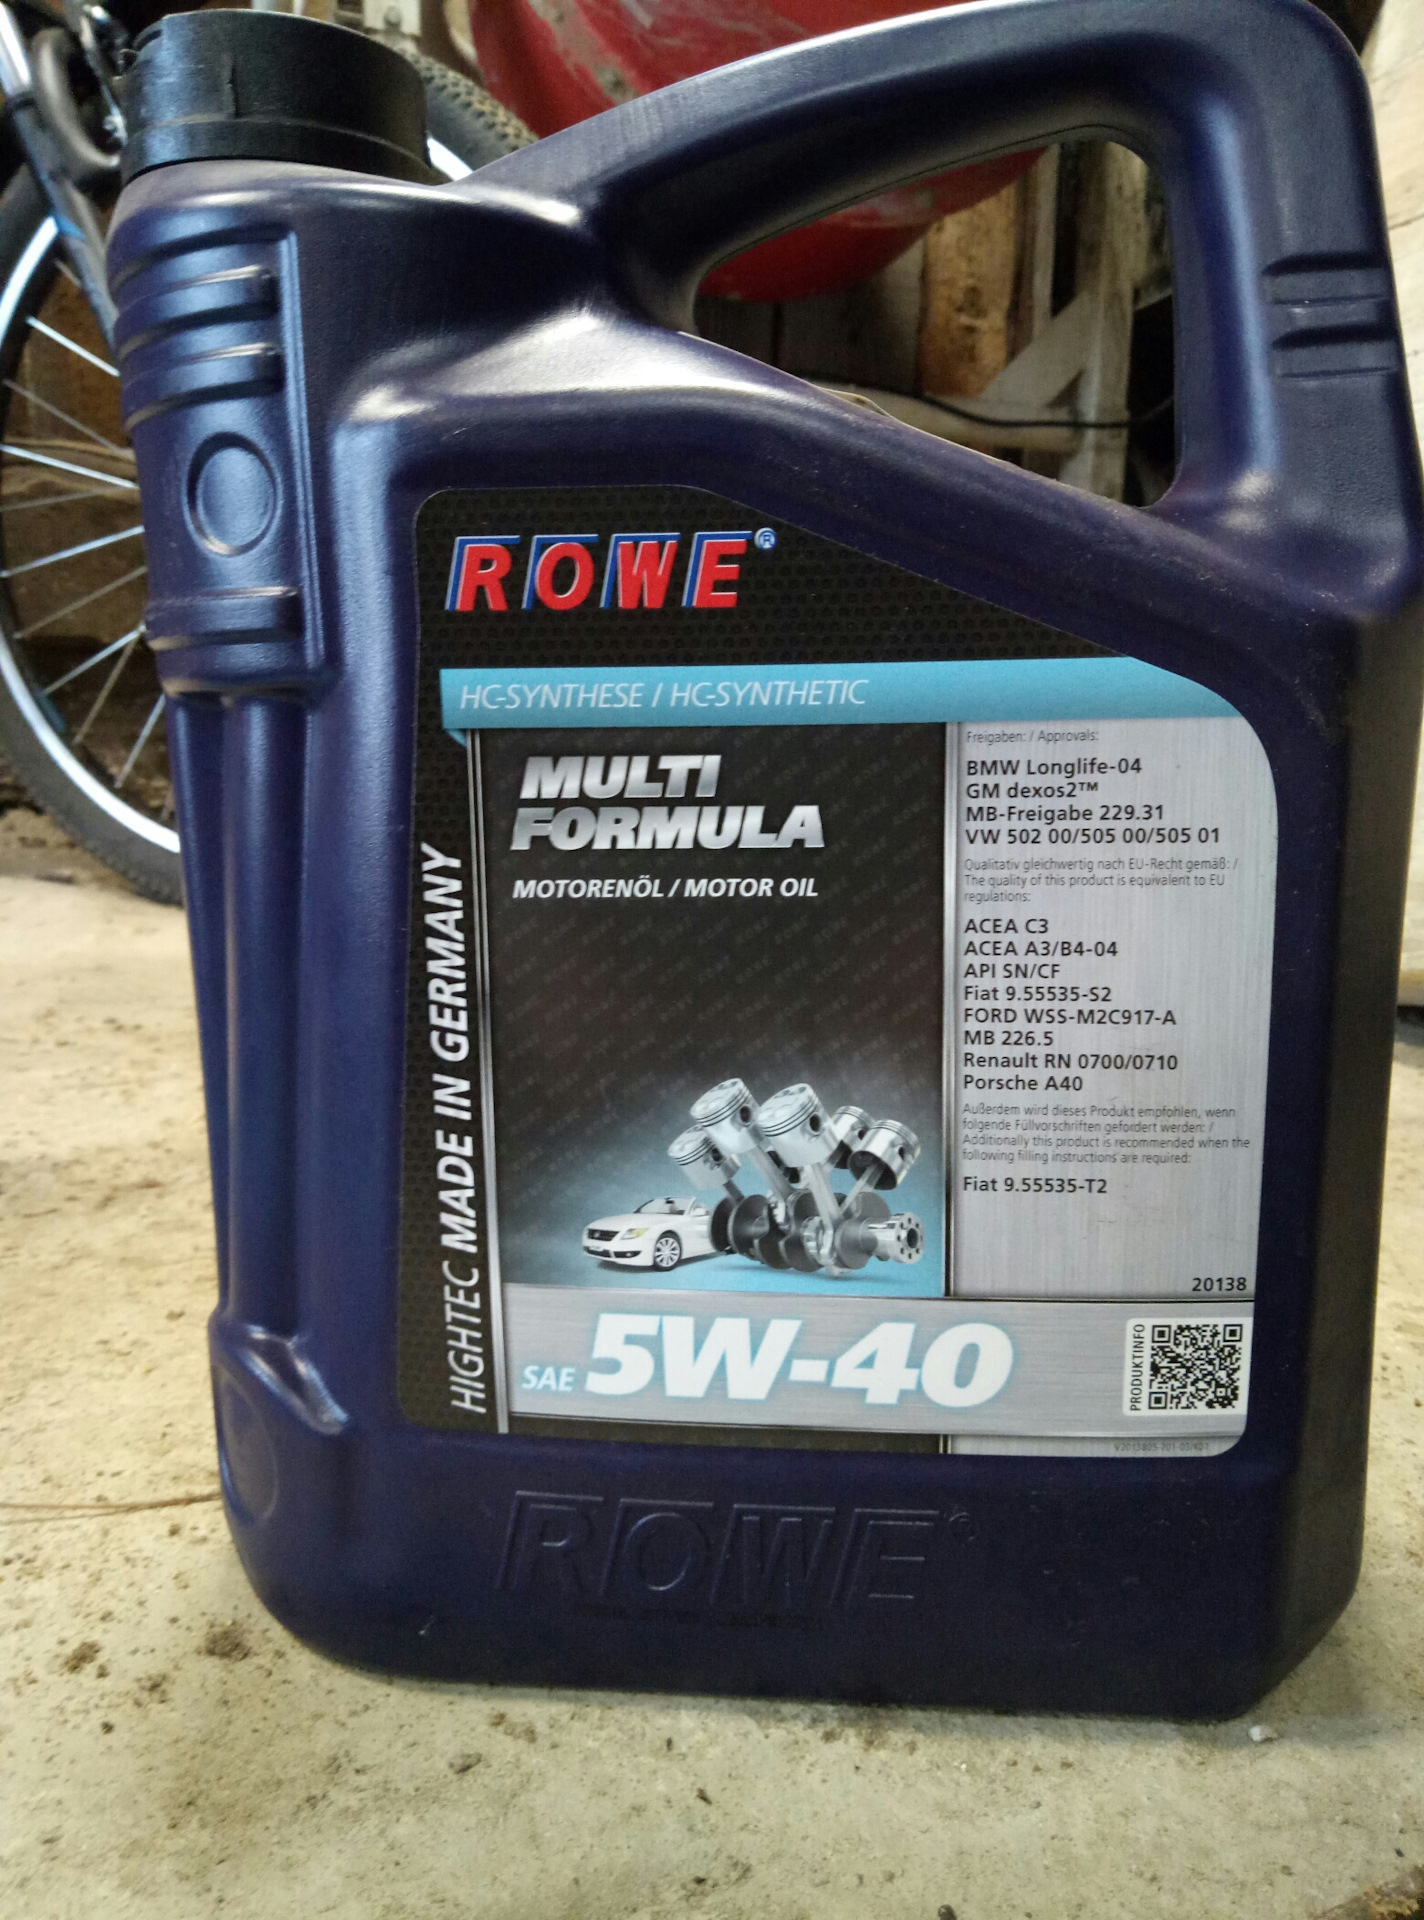 Rove масло. Rowe 5w40. Моторное масло Рове 5w40. Масло Rowe 5w40. Rowe 5w40 a3.